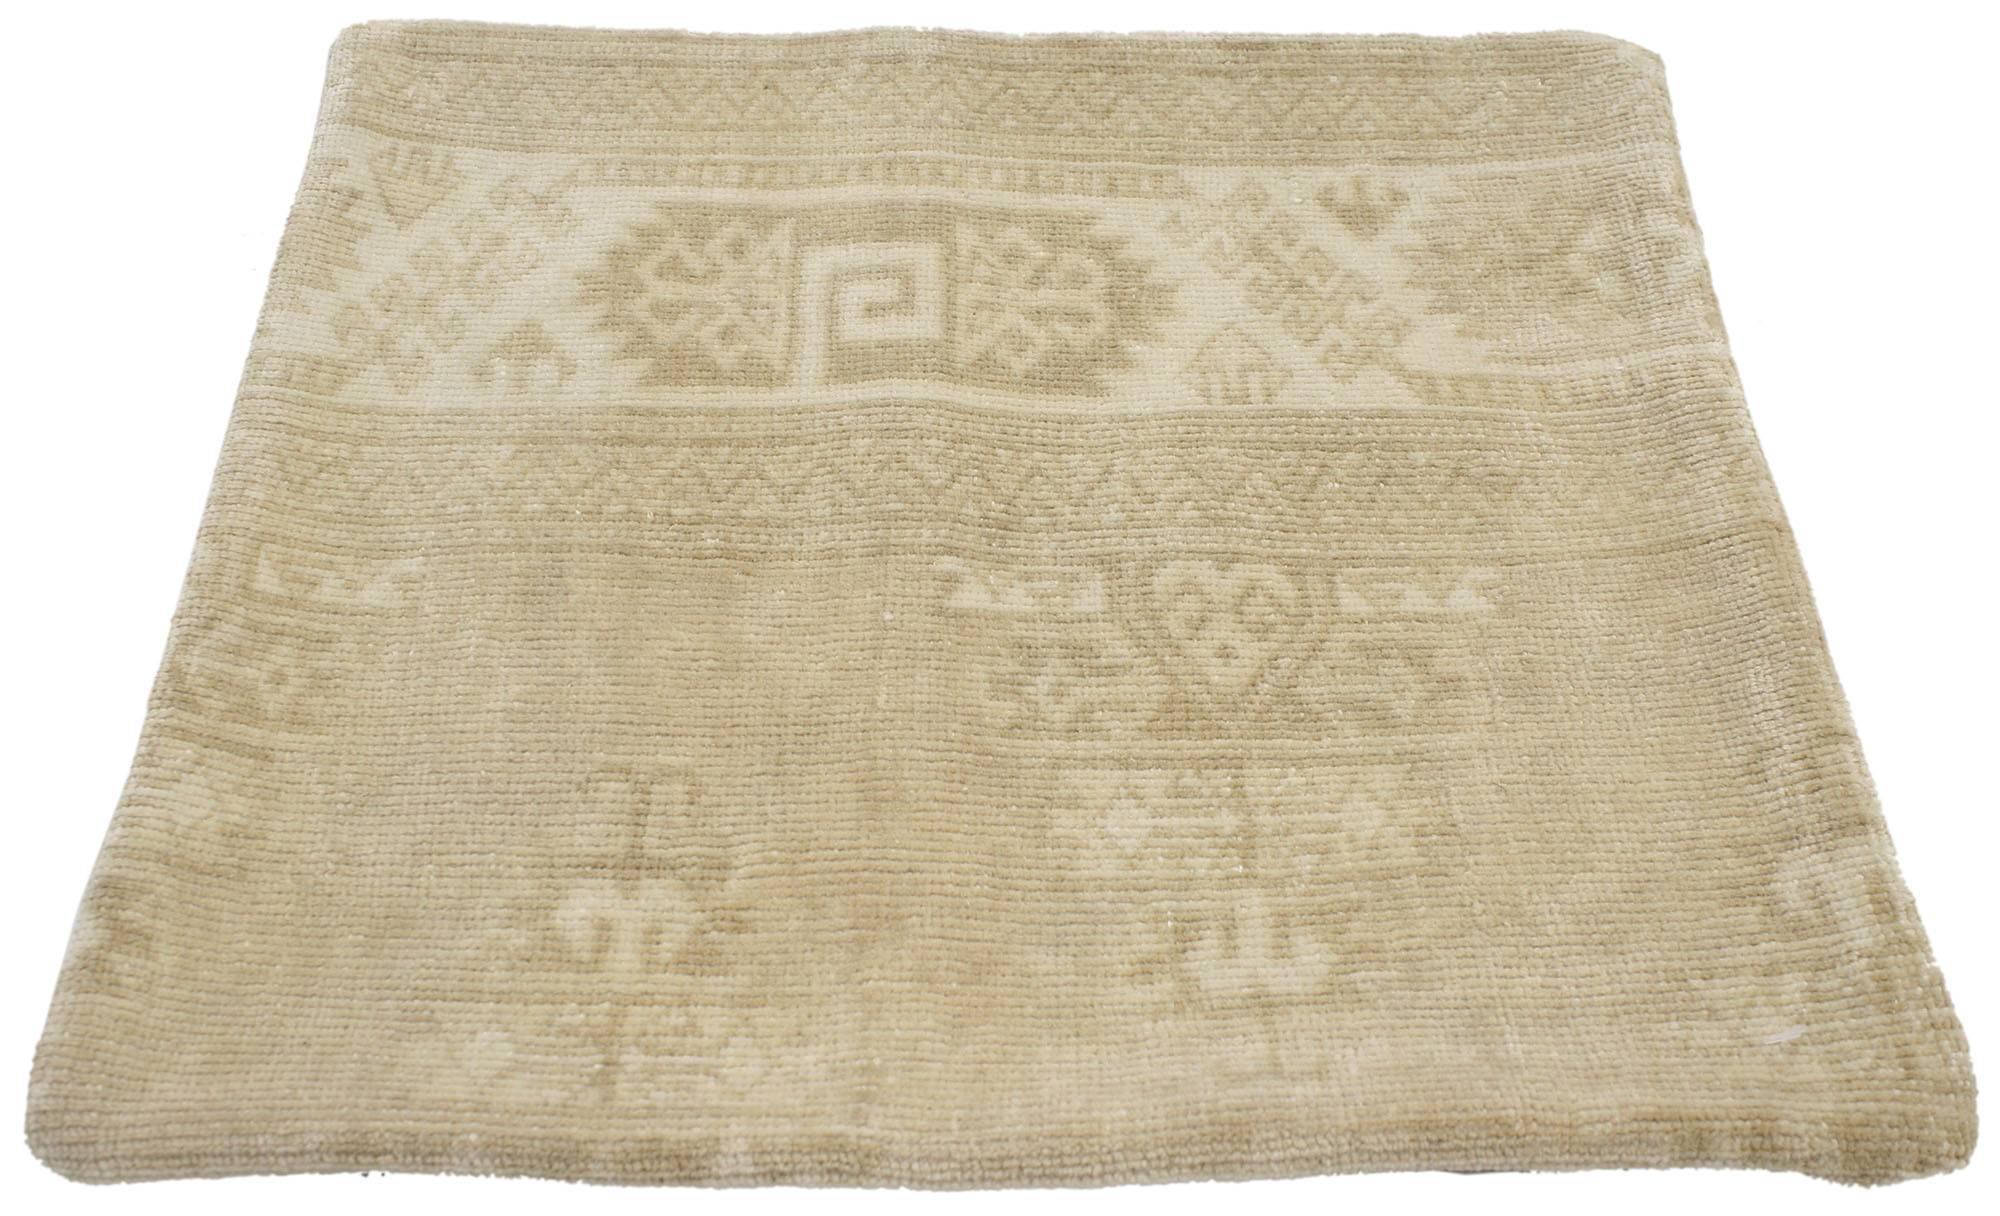 52226, vintage Oushak pillow cover with soft muted colors. For a polished look on beds, sofas or chairs, this vintage Oushak pillow cover helps creates a warm and cozy space. This pillow cover was made from a vintage Oushak rug. It features a